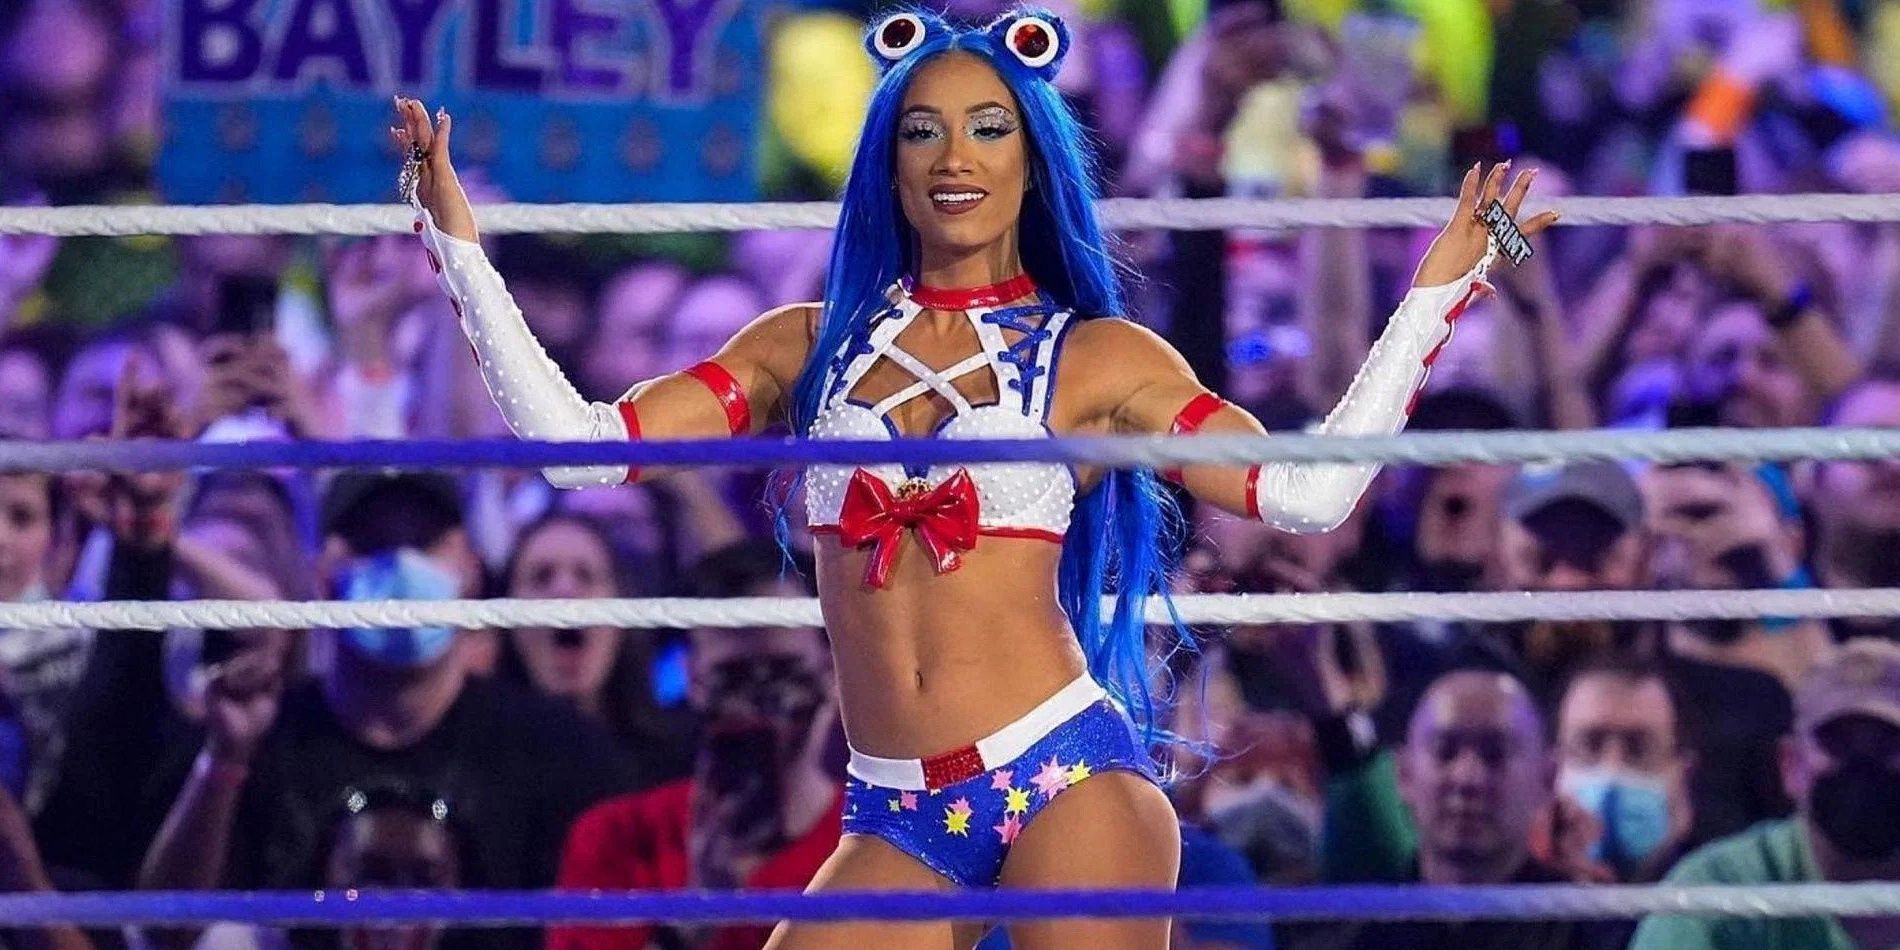 Sasha Banks has been away from WWE for over six months